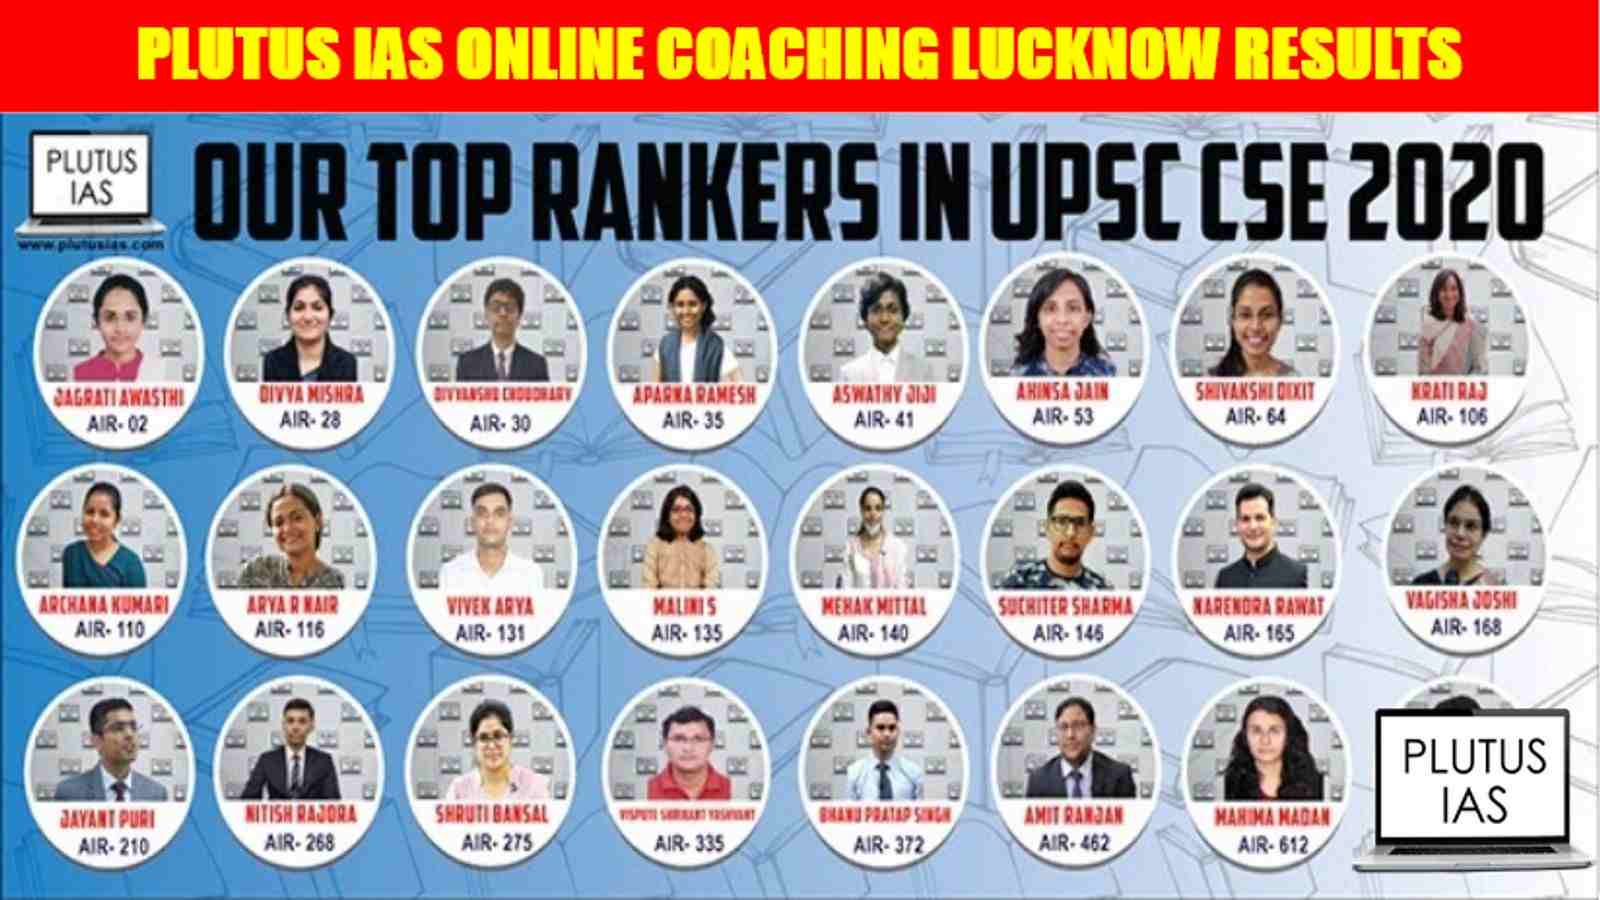 Plutus IAS Online Coaching Lucknow Results